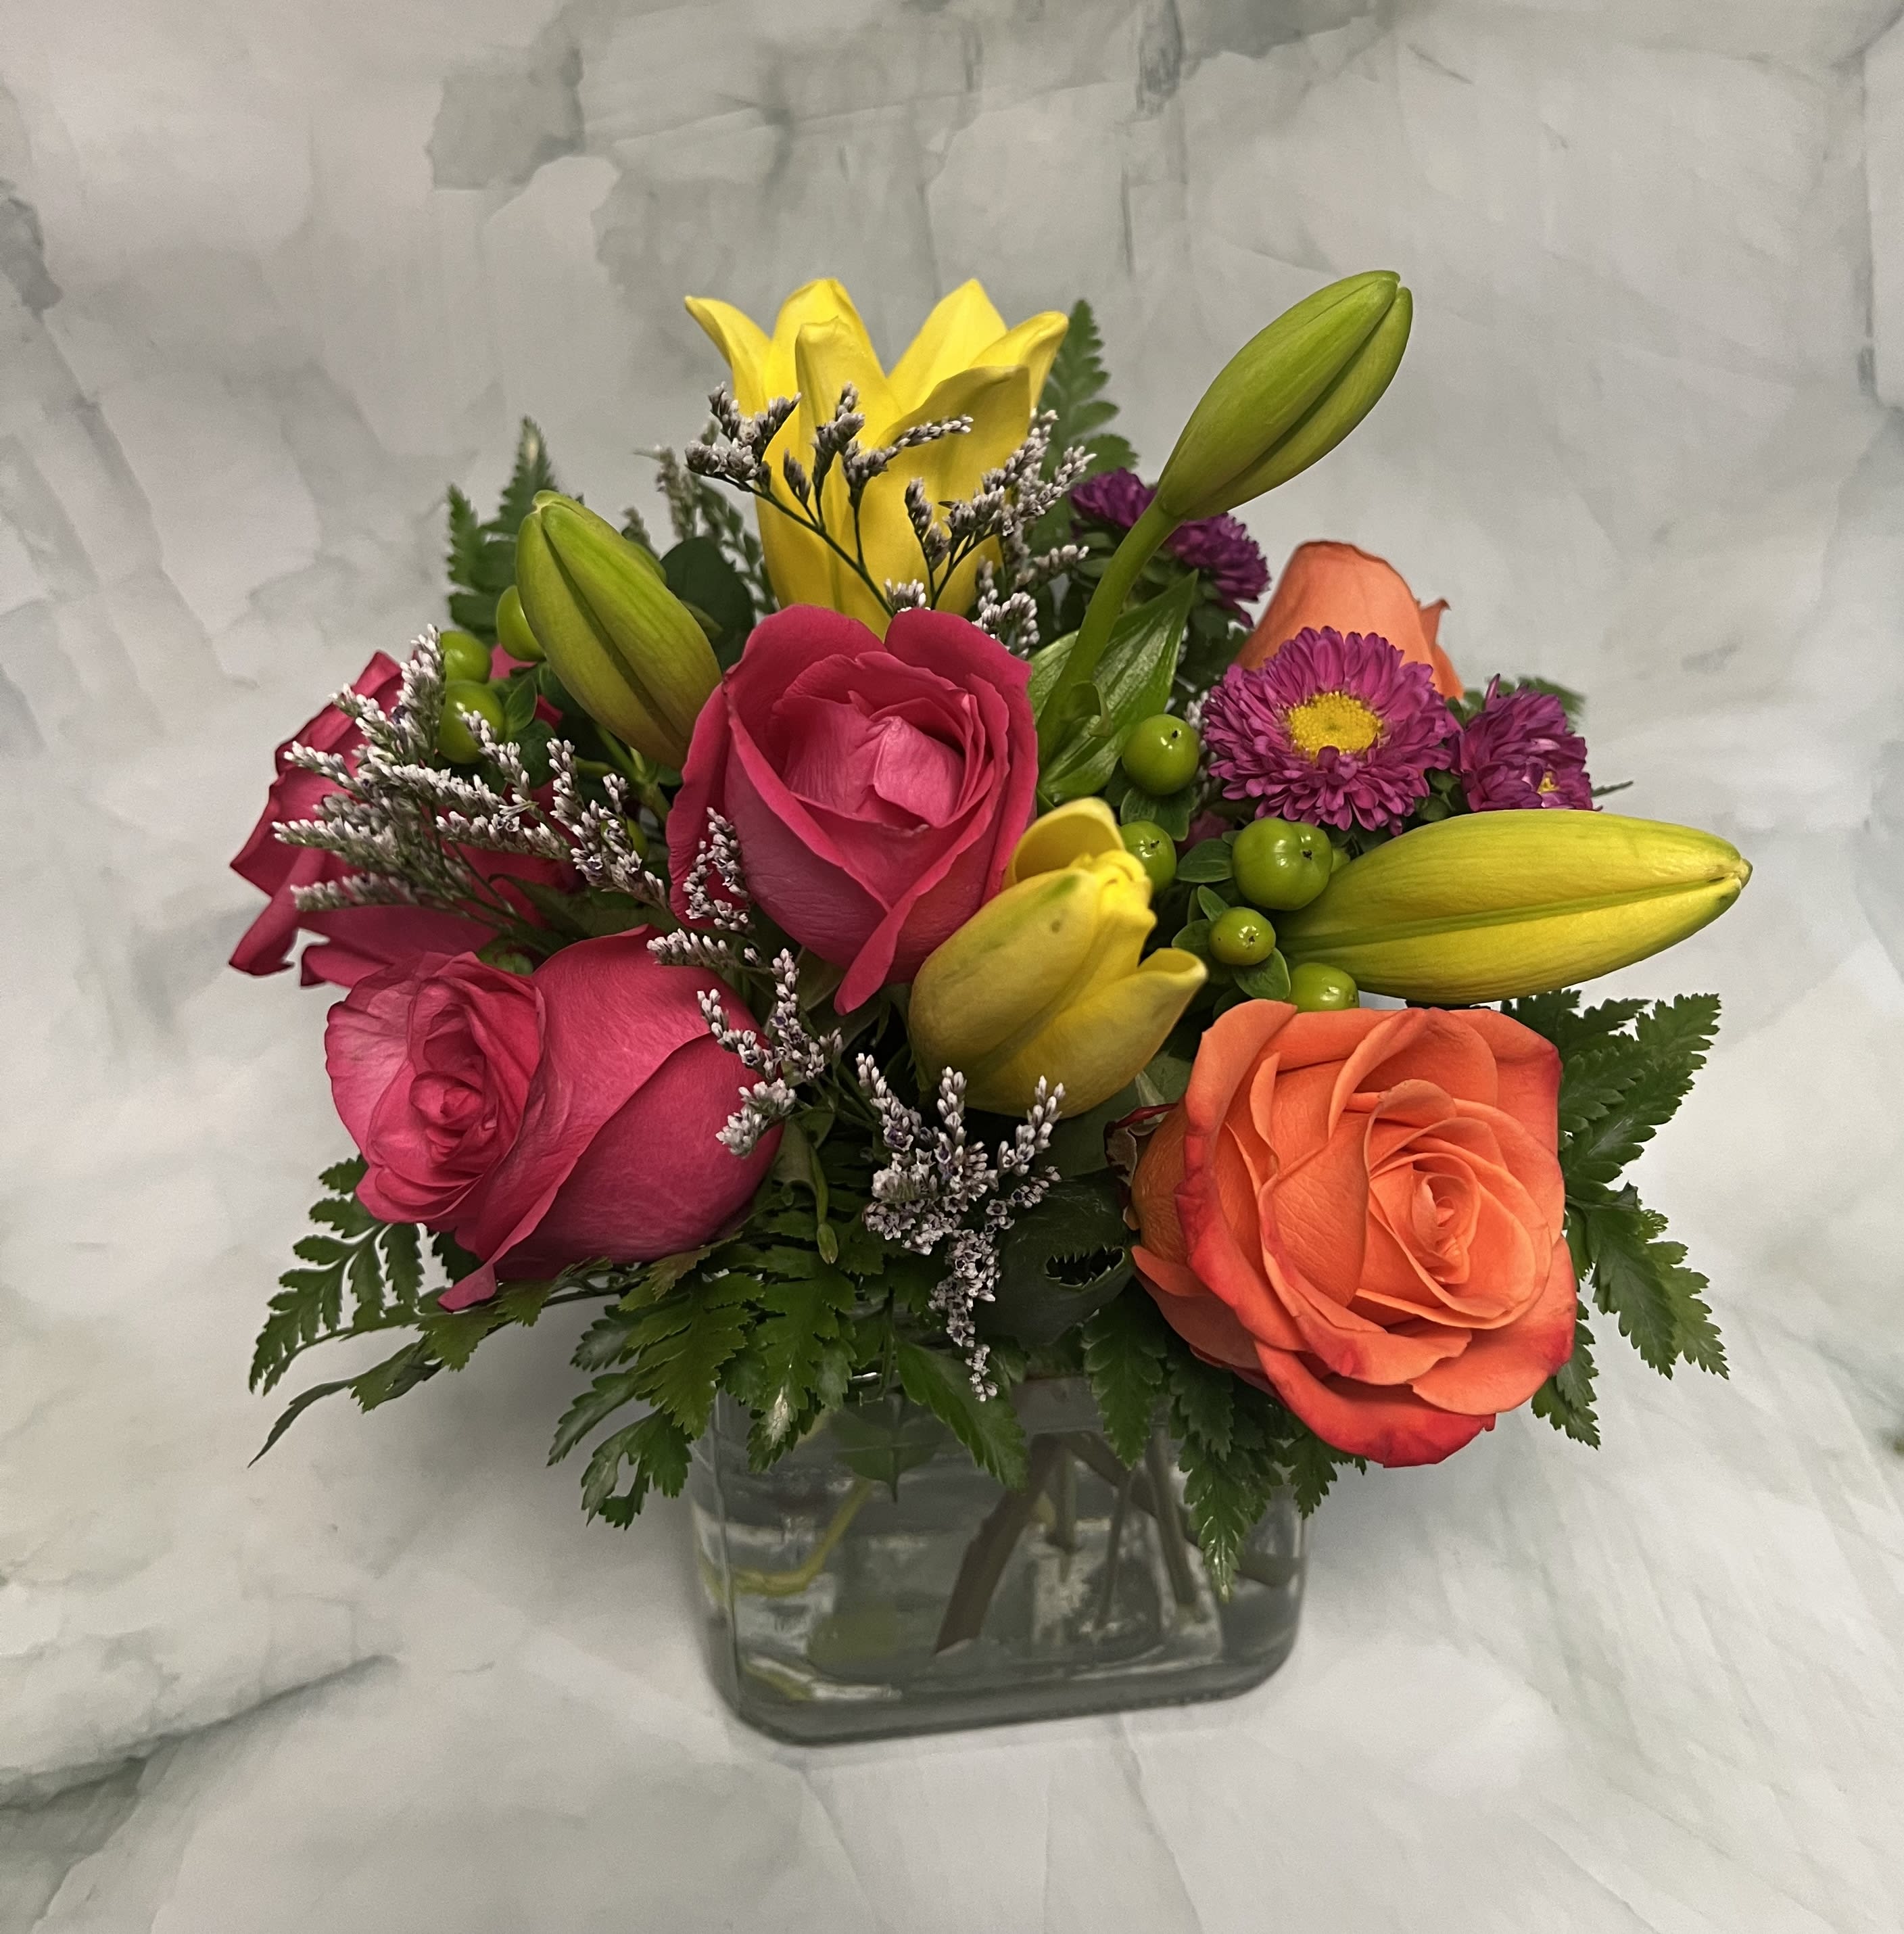 Splash of Fun - Splash in and have some fun with this colorful arrangement. This includes Lilies, Roses, Hypericum Berries, Aster Matsumoto, and Limonium. 